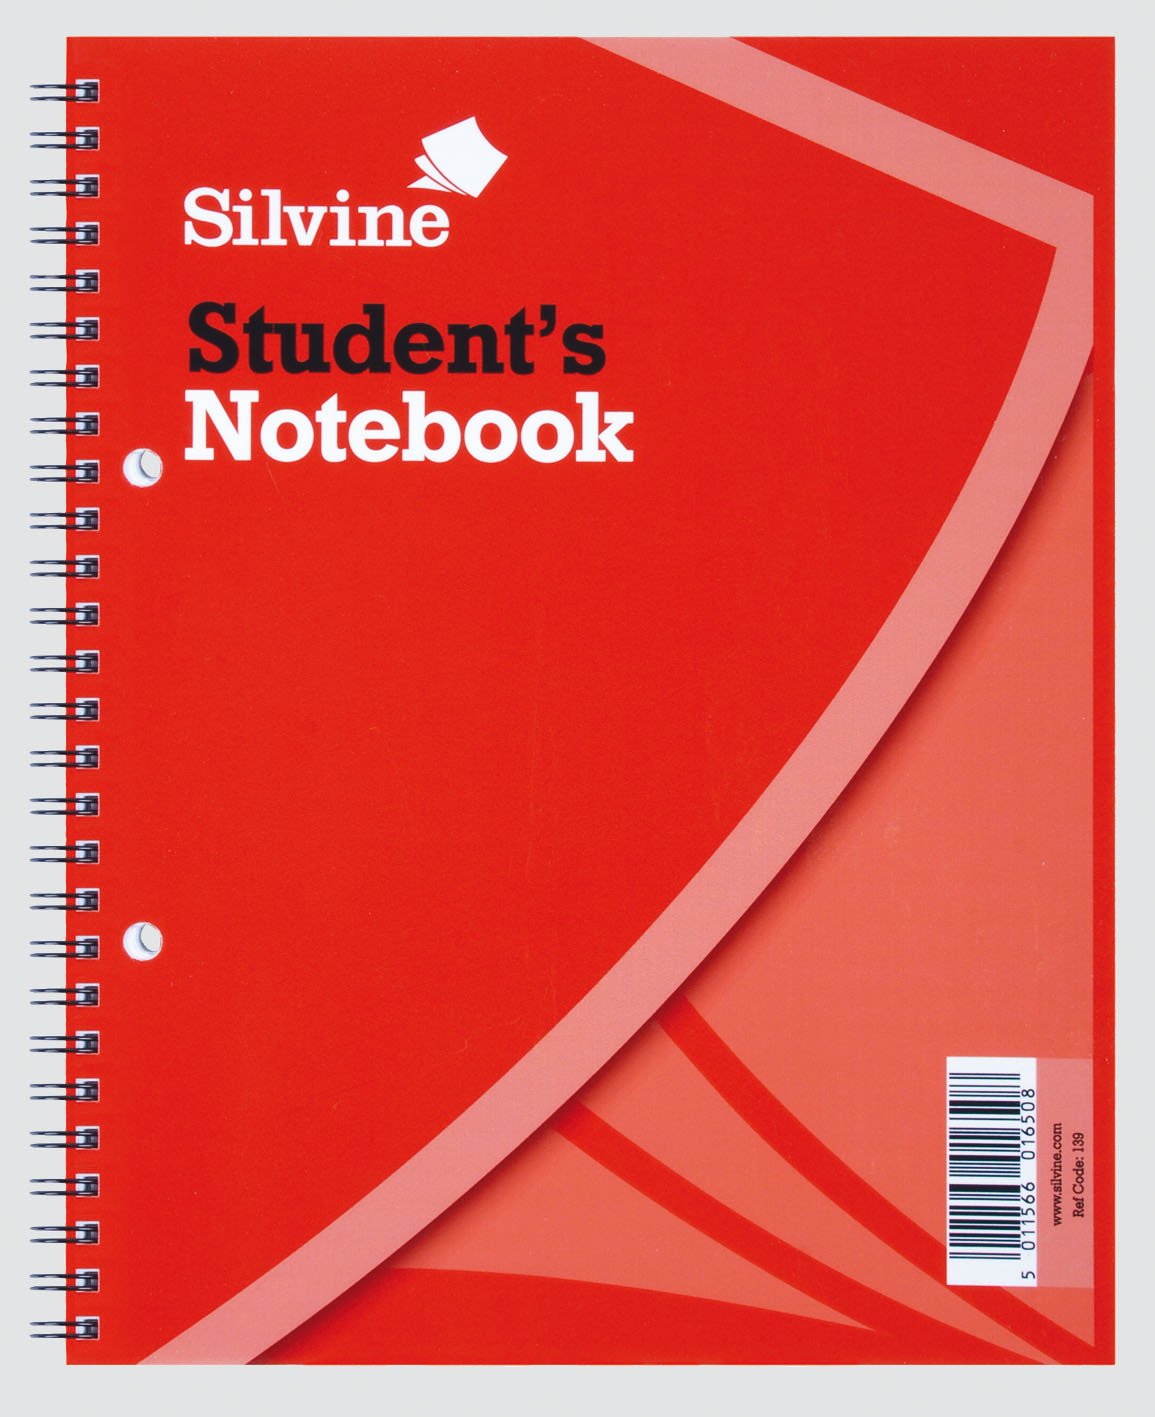 Twin Wire Student's Notebook, 229x178mm, Narrow Lined, Quality Paper, 120 Pages